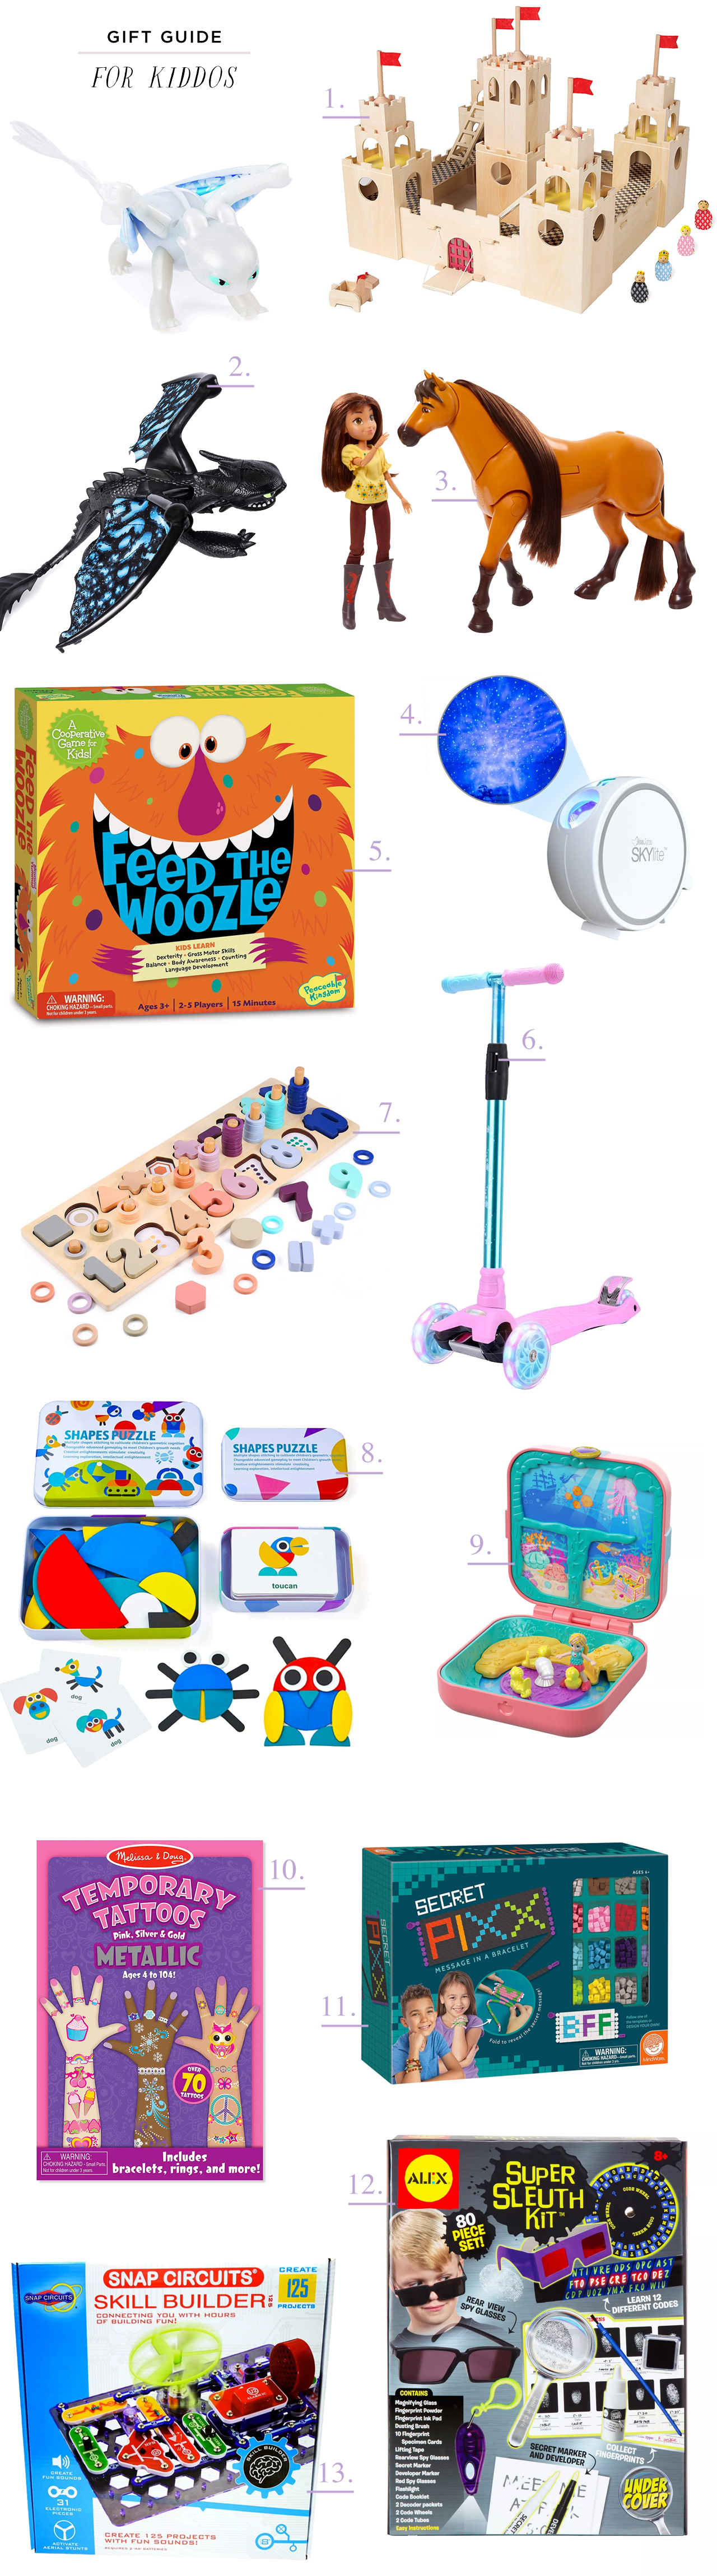 2019 Gift Guide: Gift Ideas for Kids 5-8 Years Old